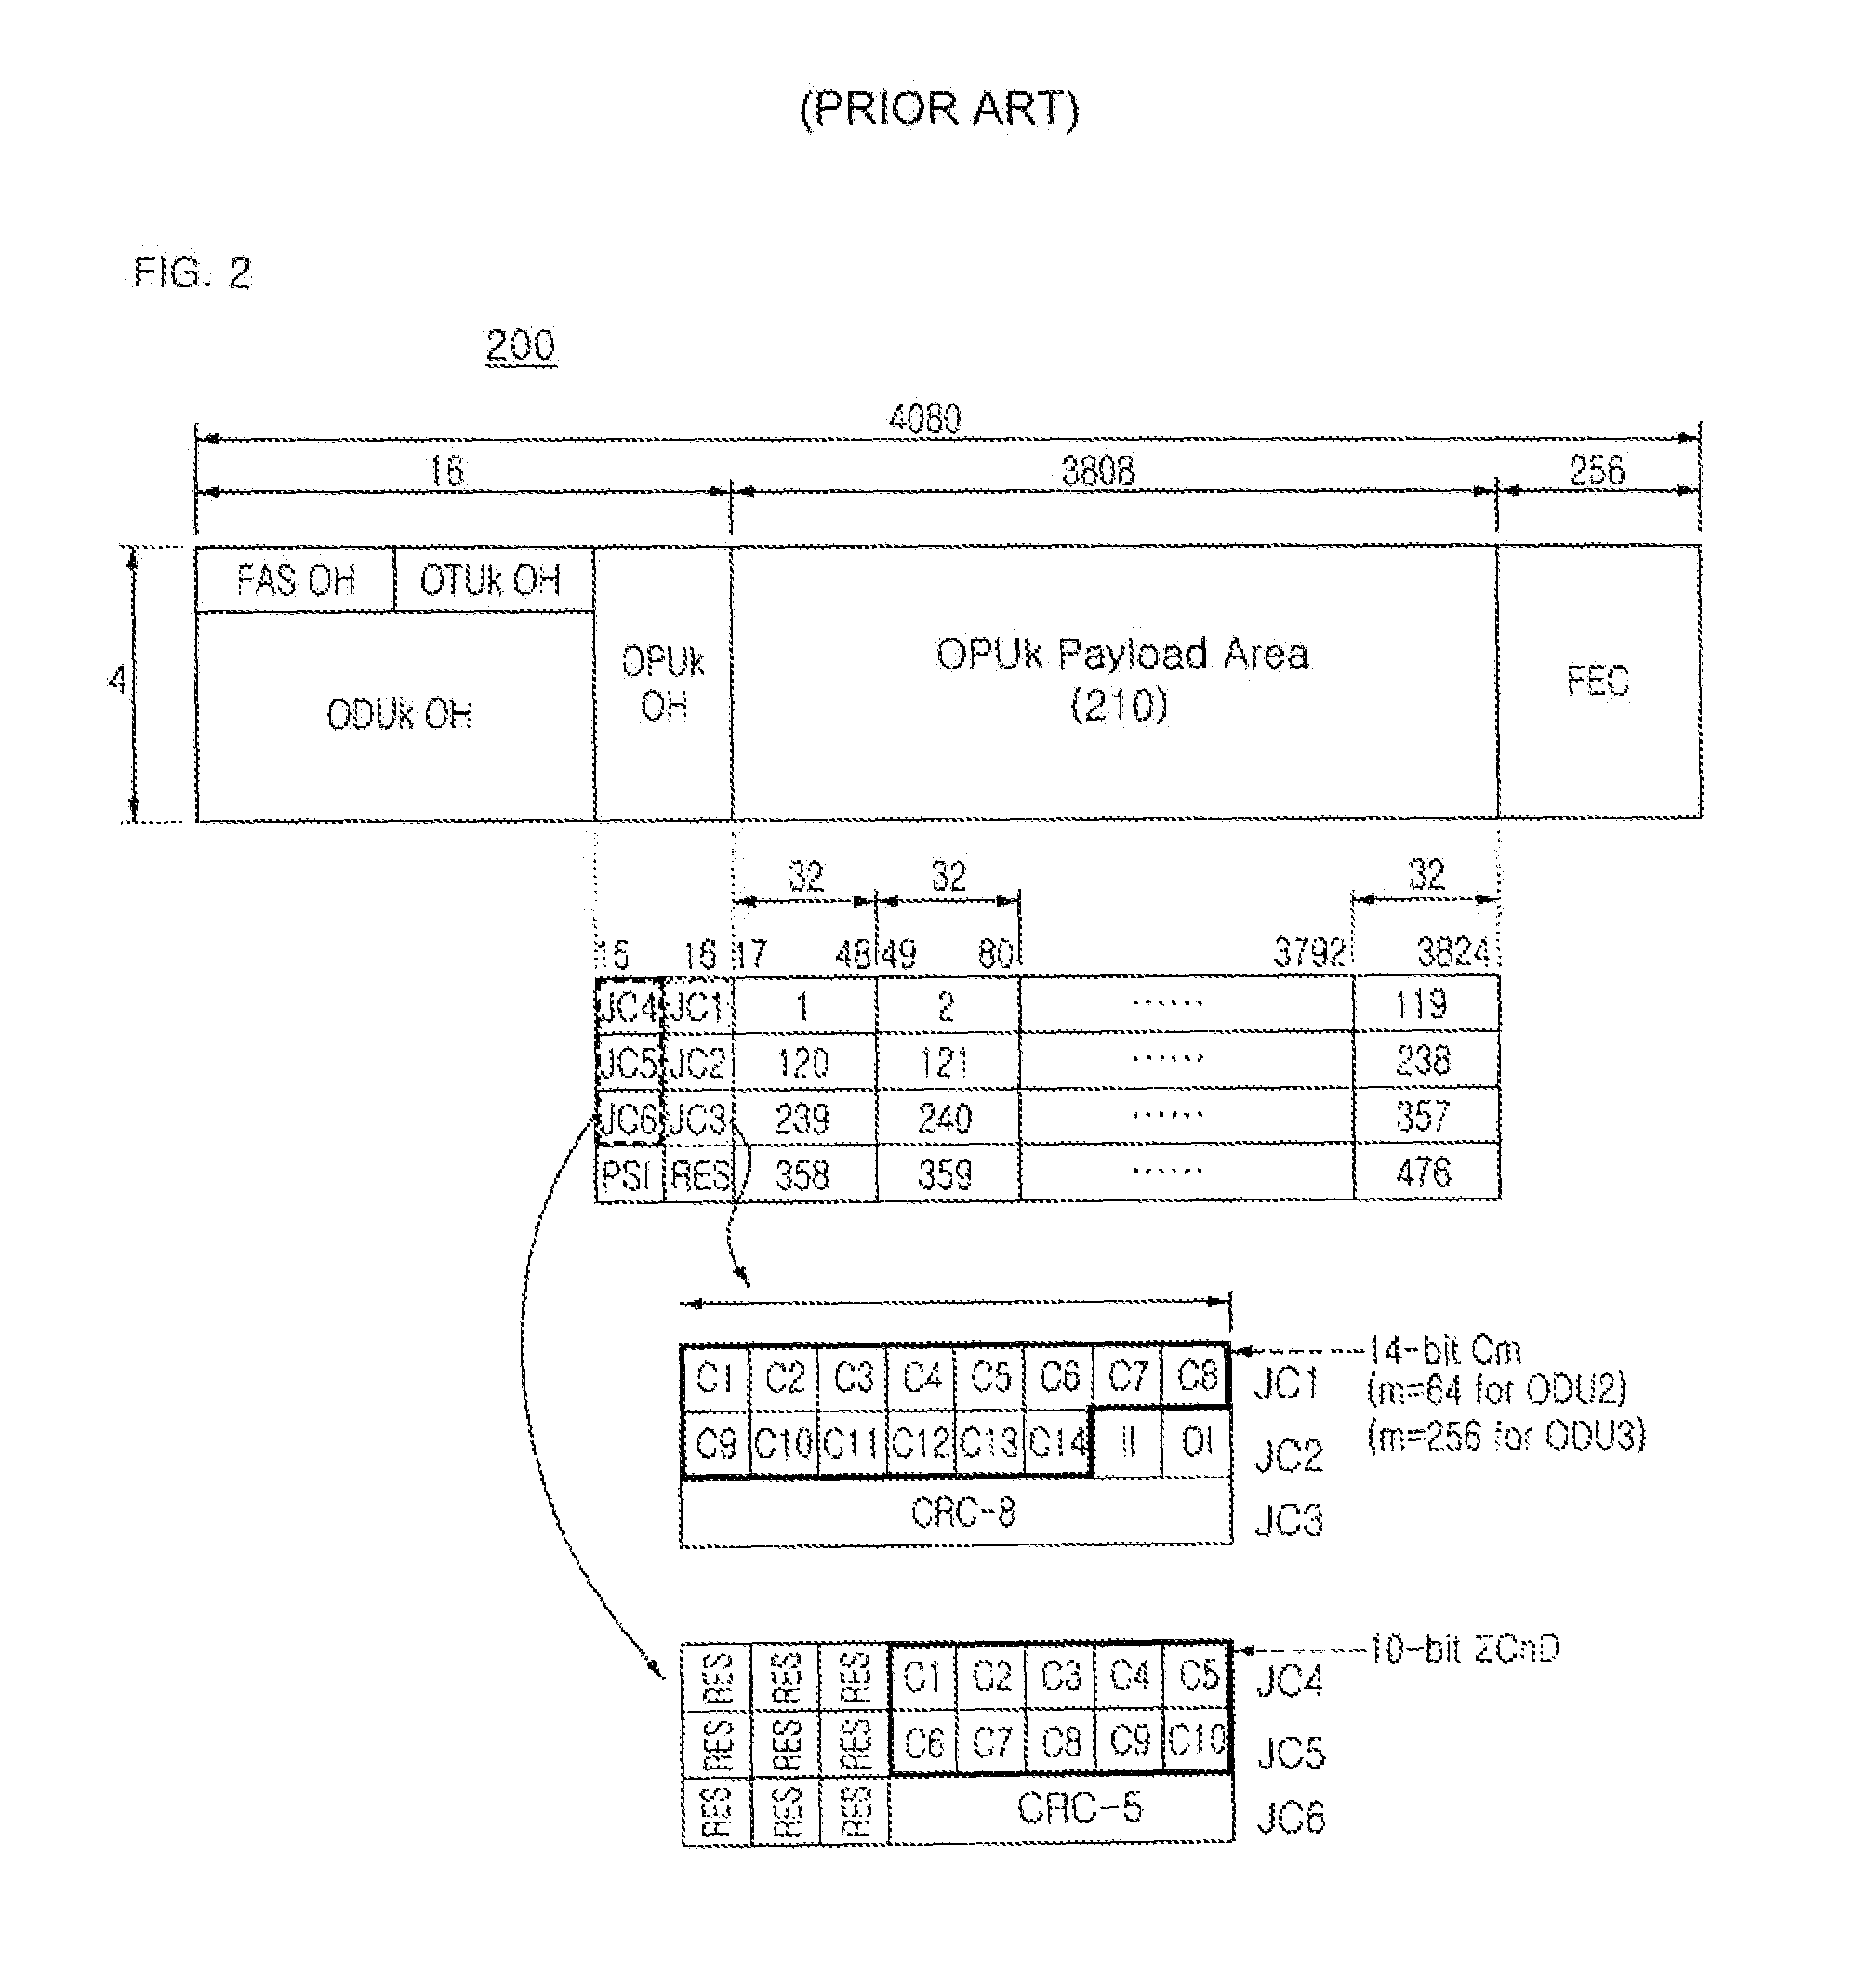 Apparatus and method for mapping a client signal